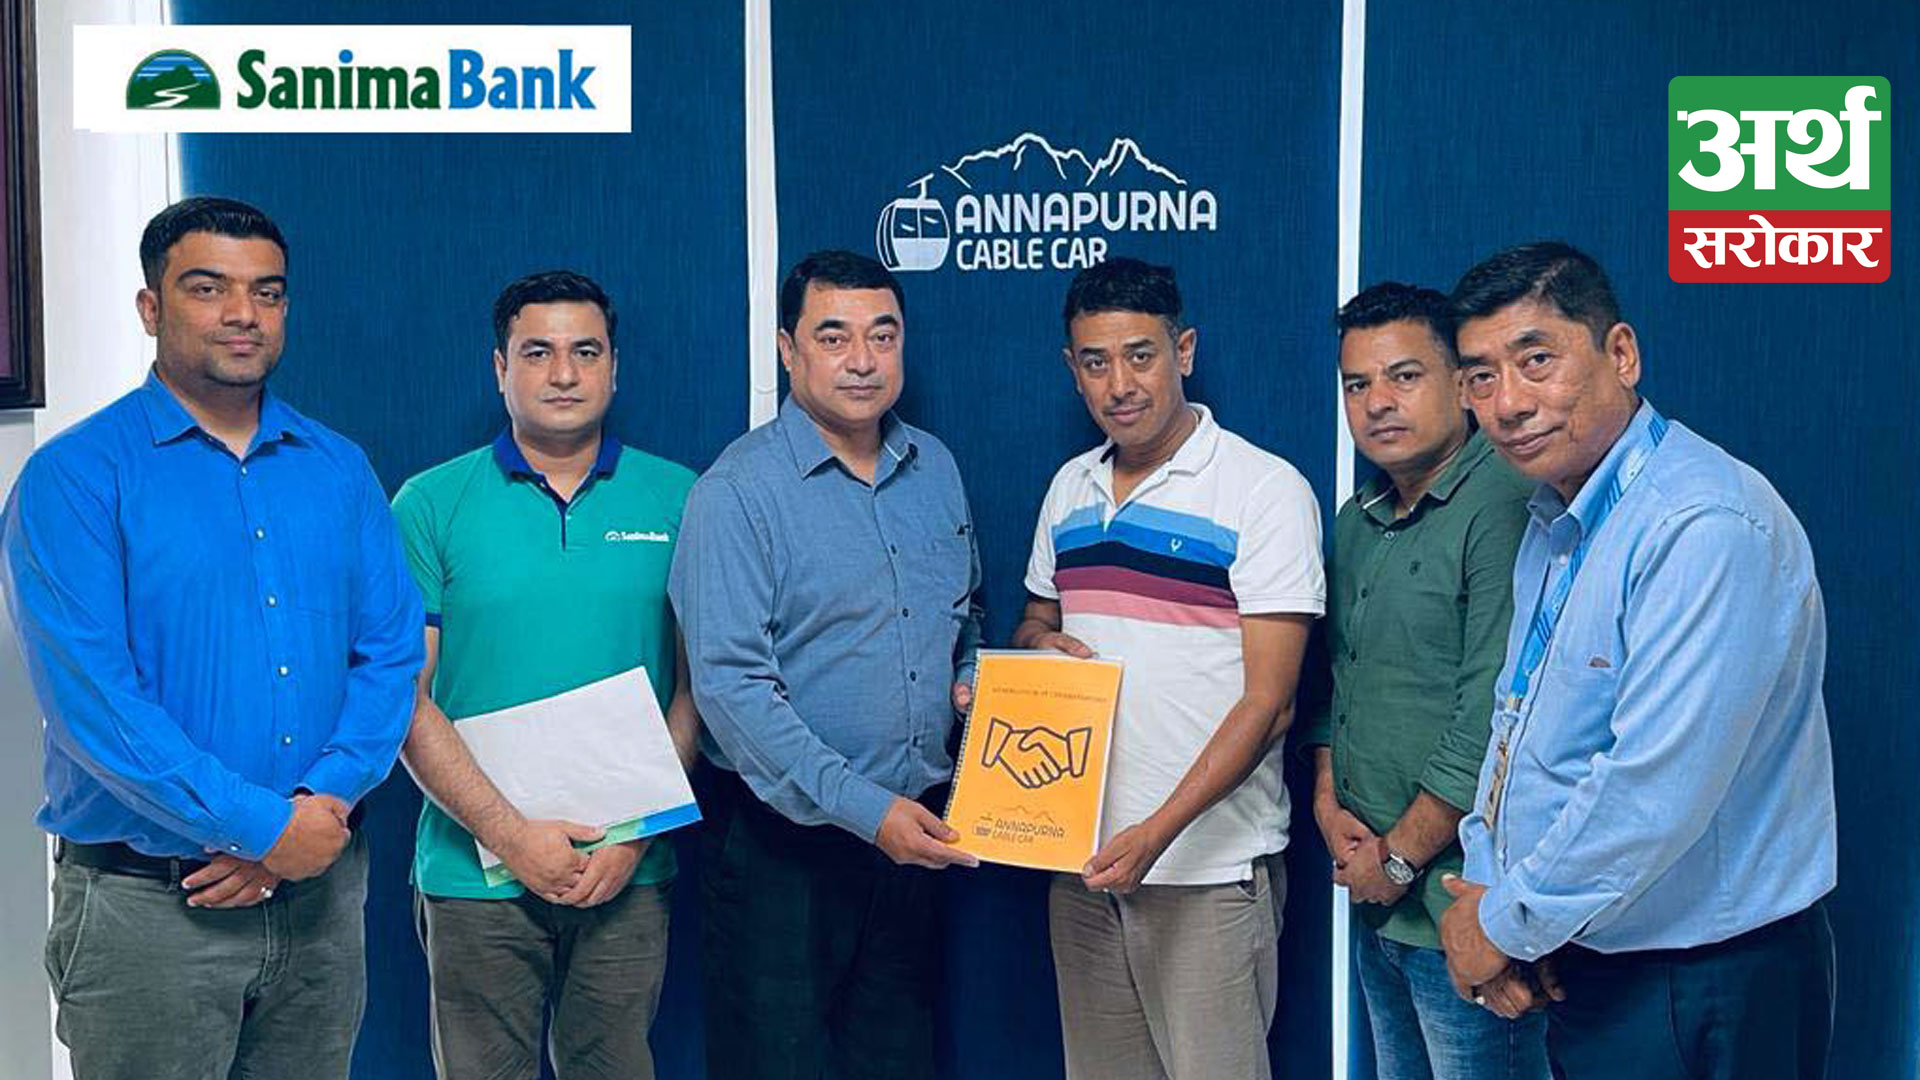 Sanima Bank signed MoU with Annapurna Cable car